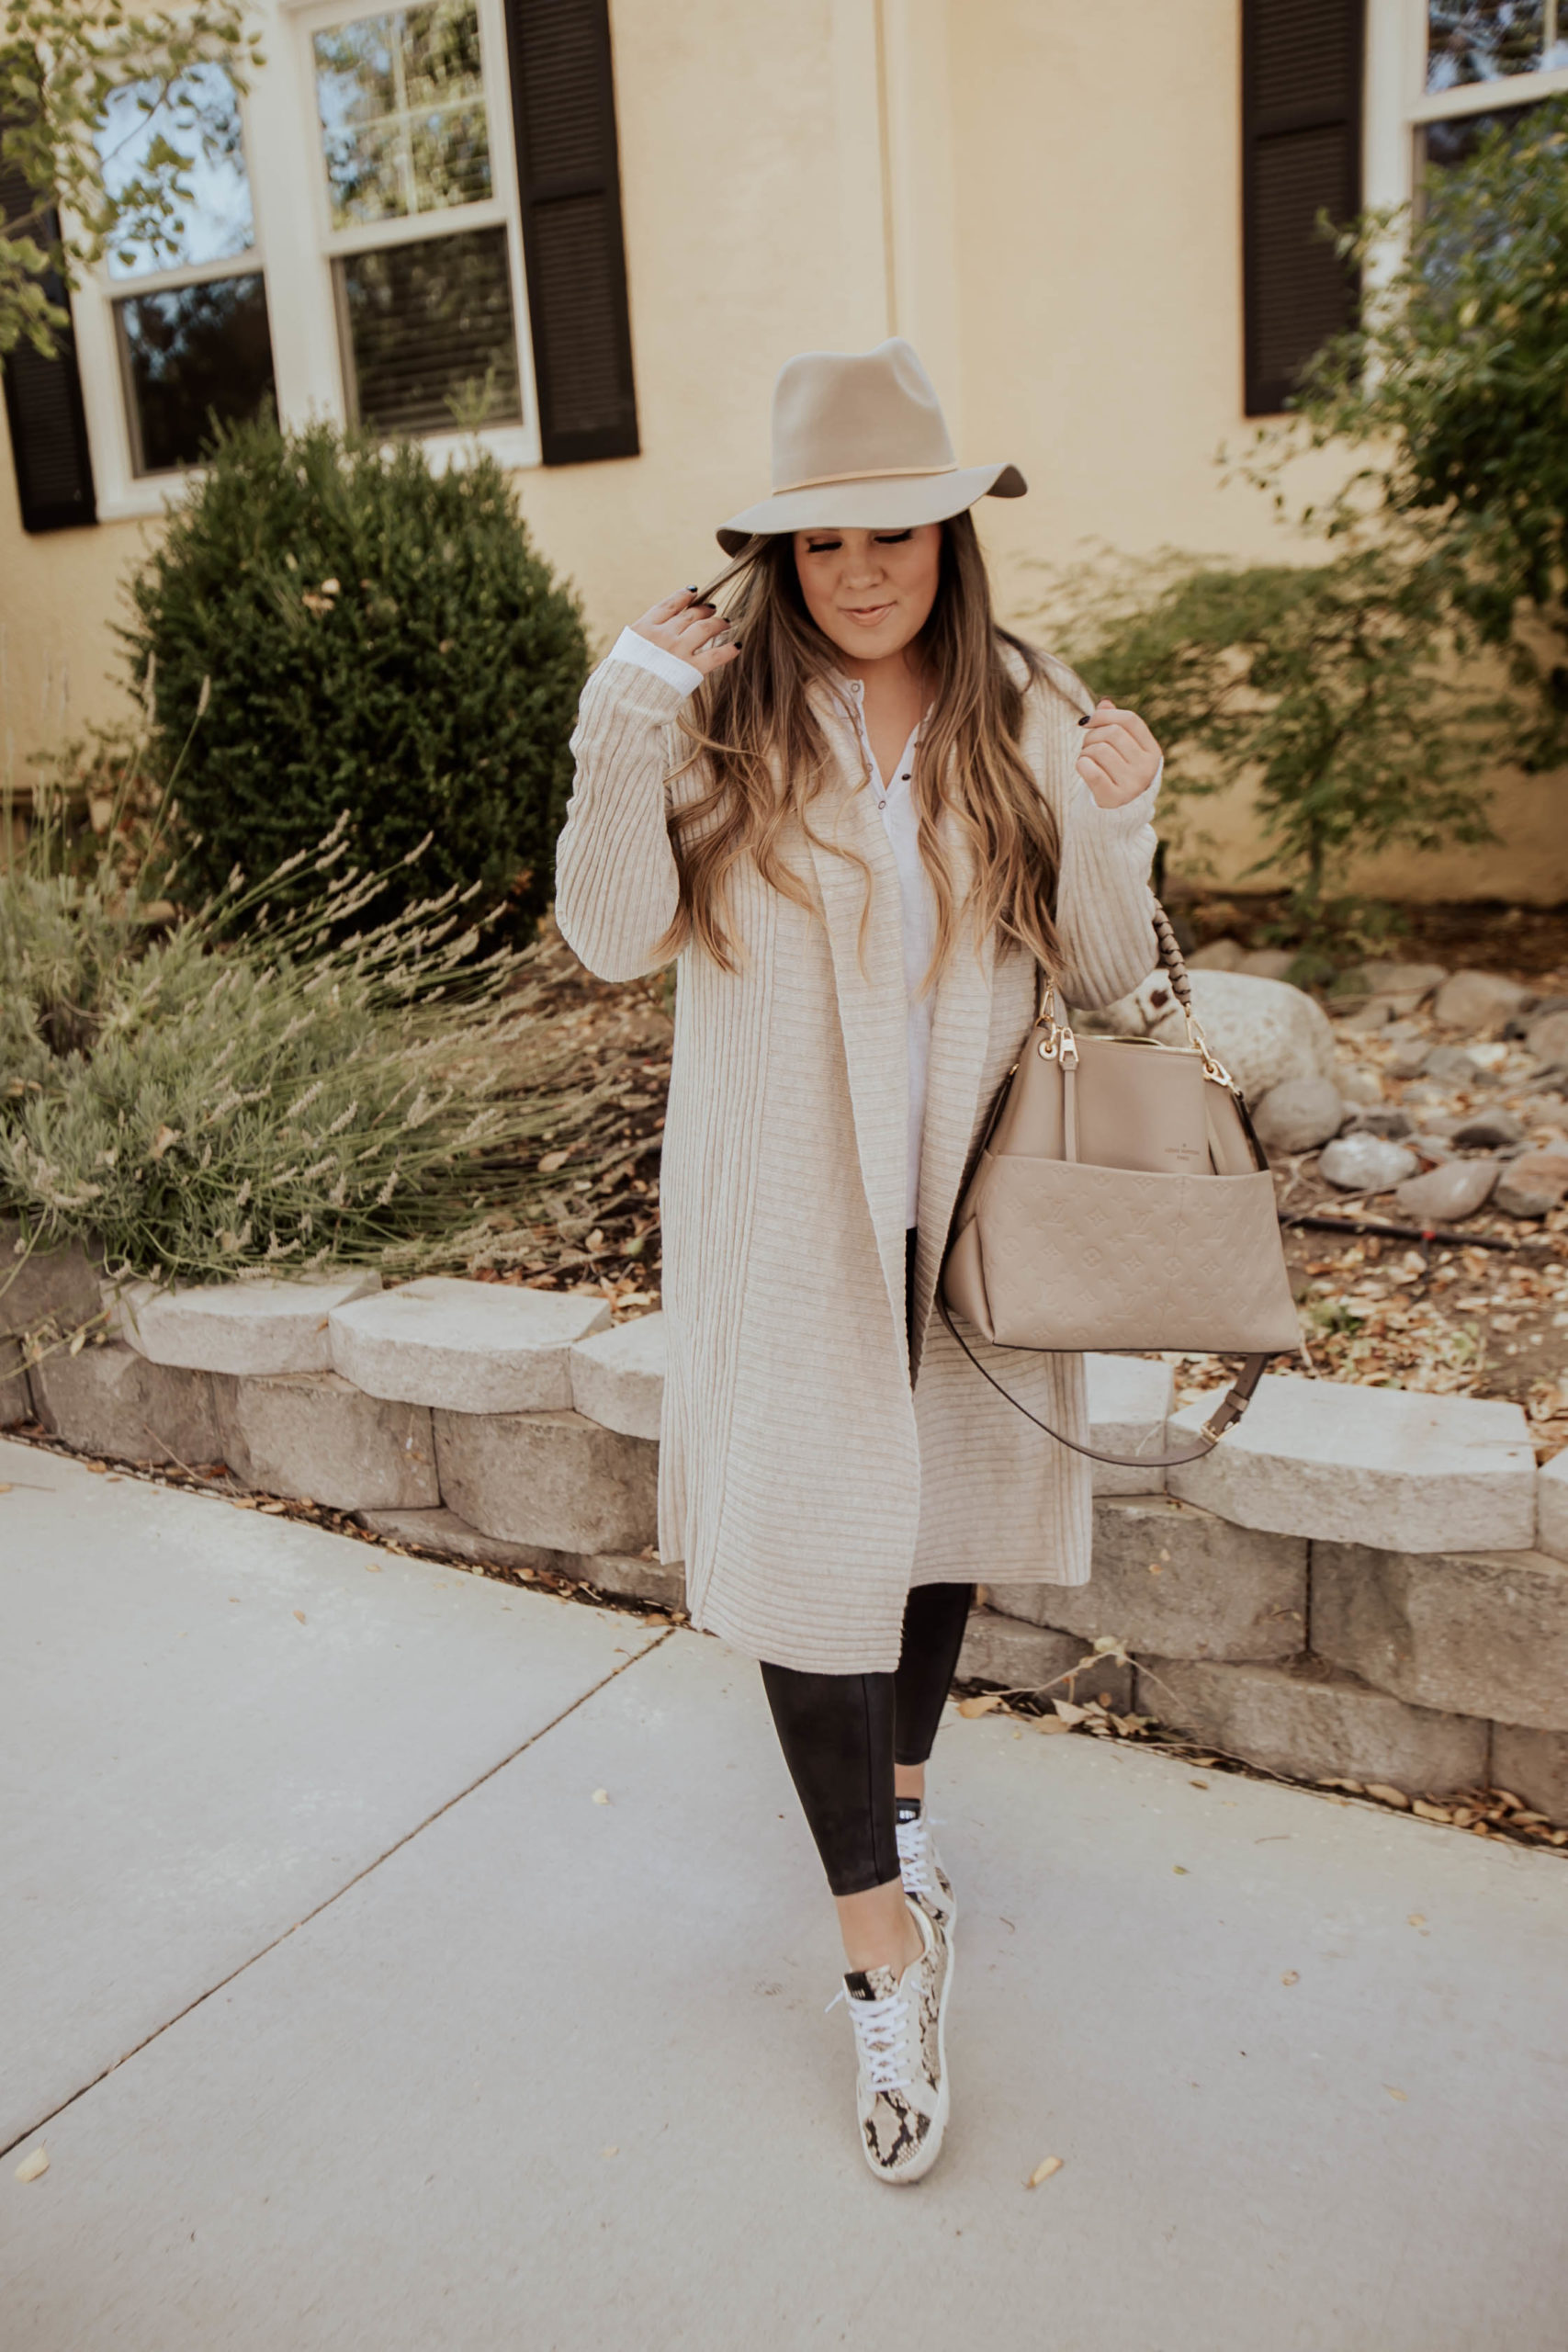 Reno blogger, Ashley Zeal Hurd, shares "Ashley's October 2020 Amazon Favorites" - ft everything from home & baby to fashion and productivity. 